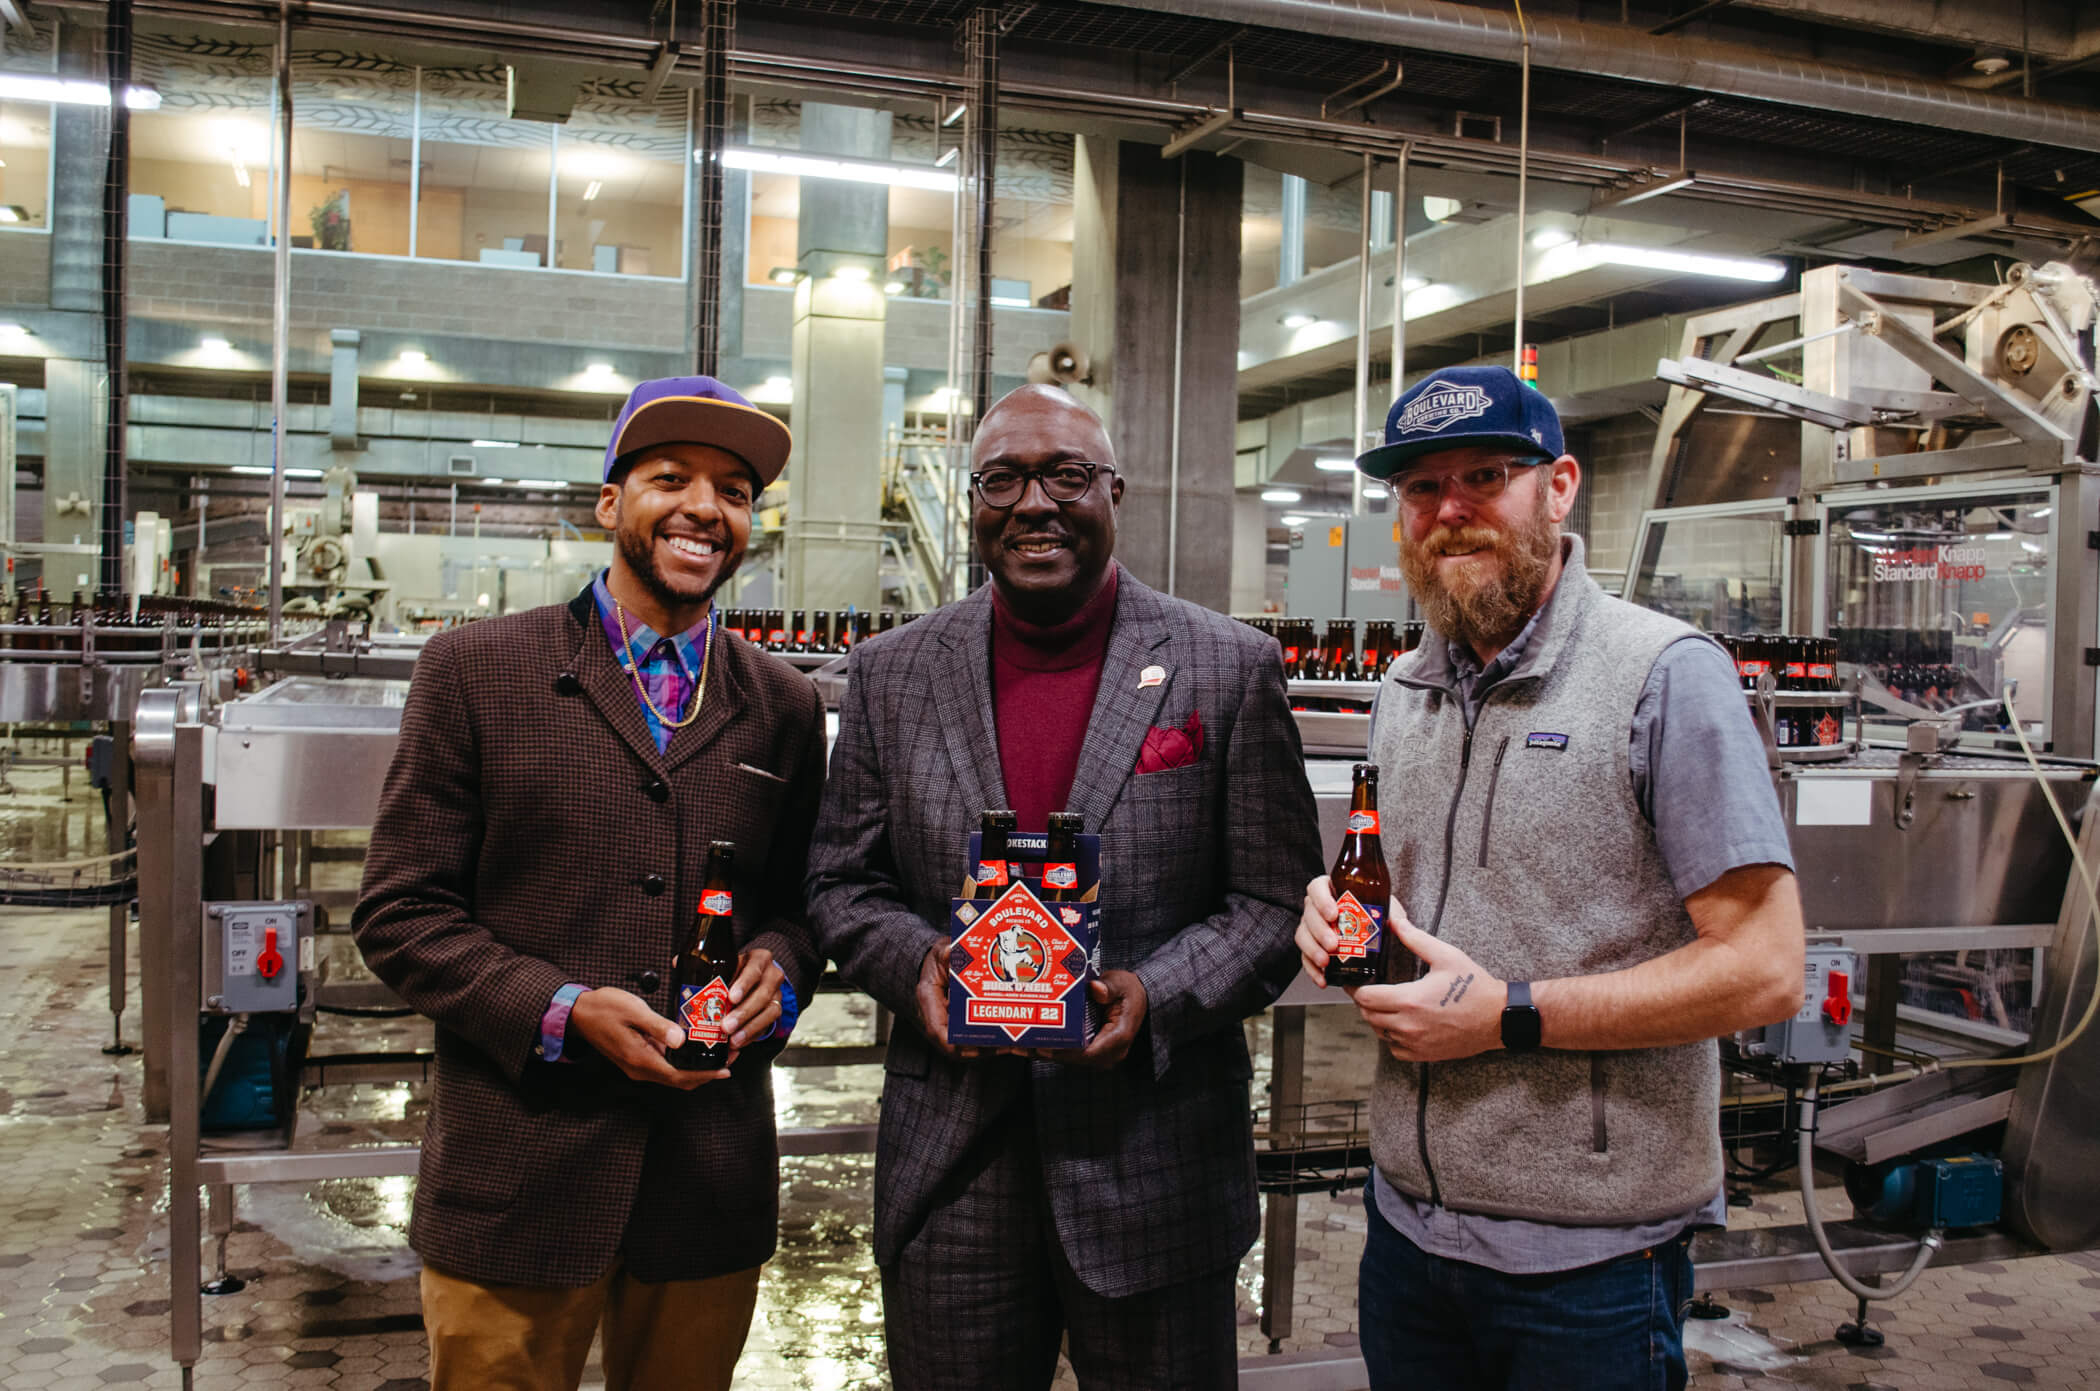 Boulevard Brewing Co. and Vine Street Brewing Co. Collaborate to Honor National Baseball Hall of Fame Legend